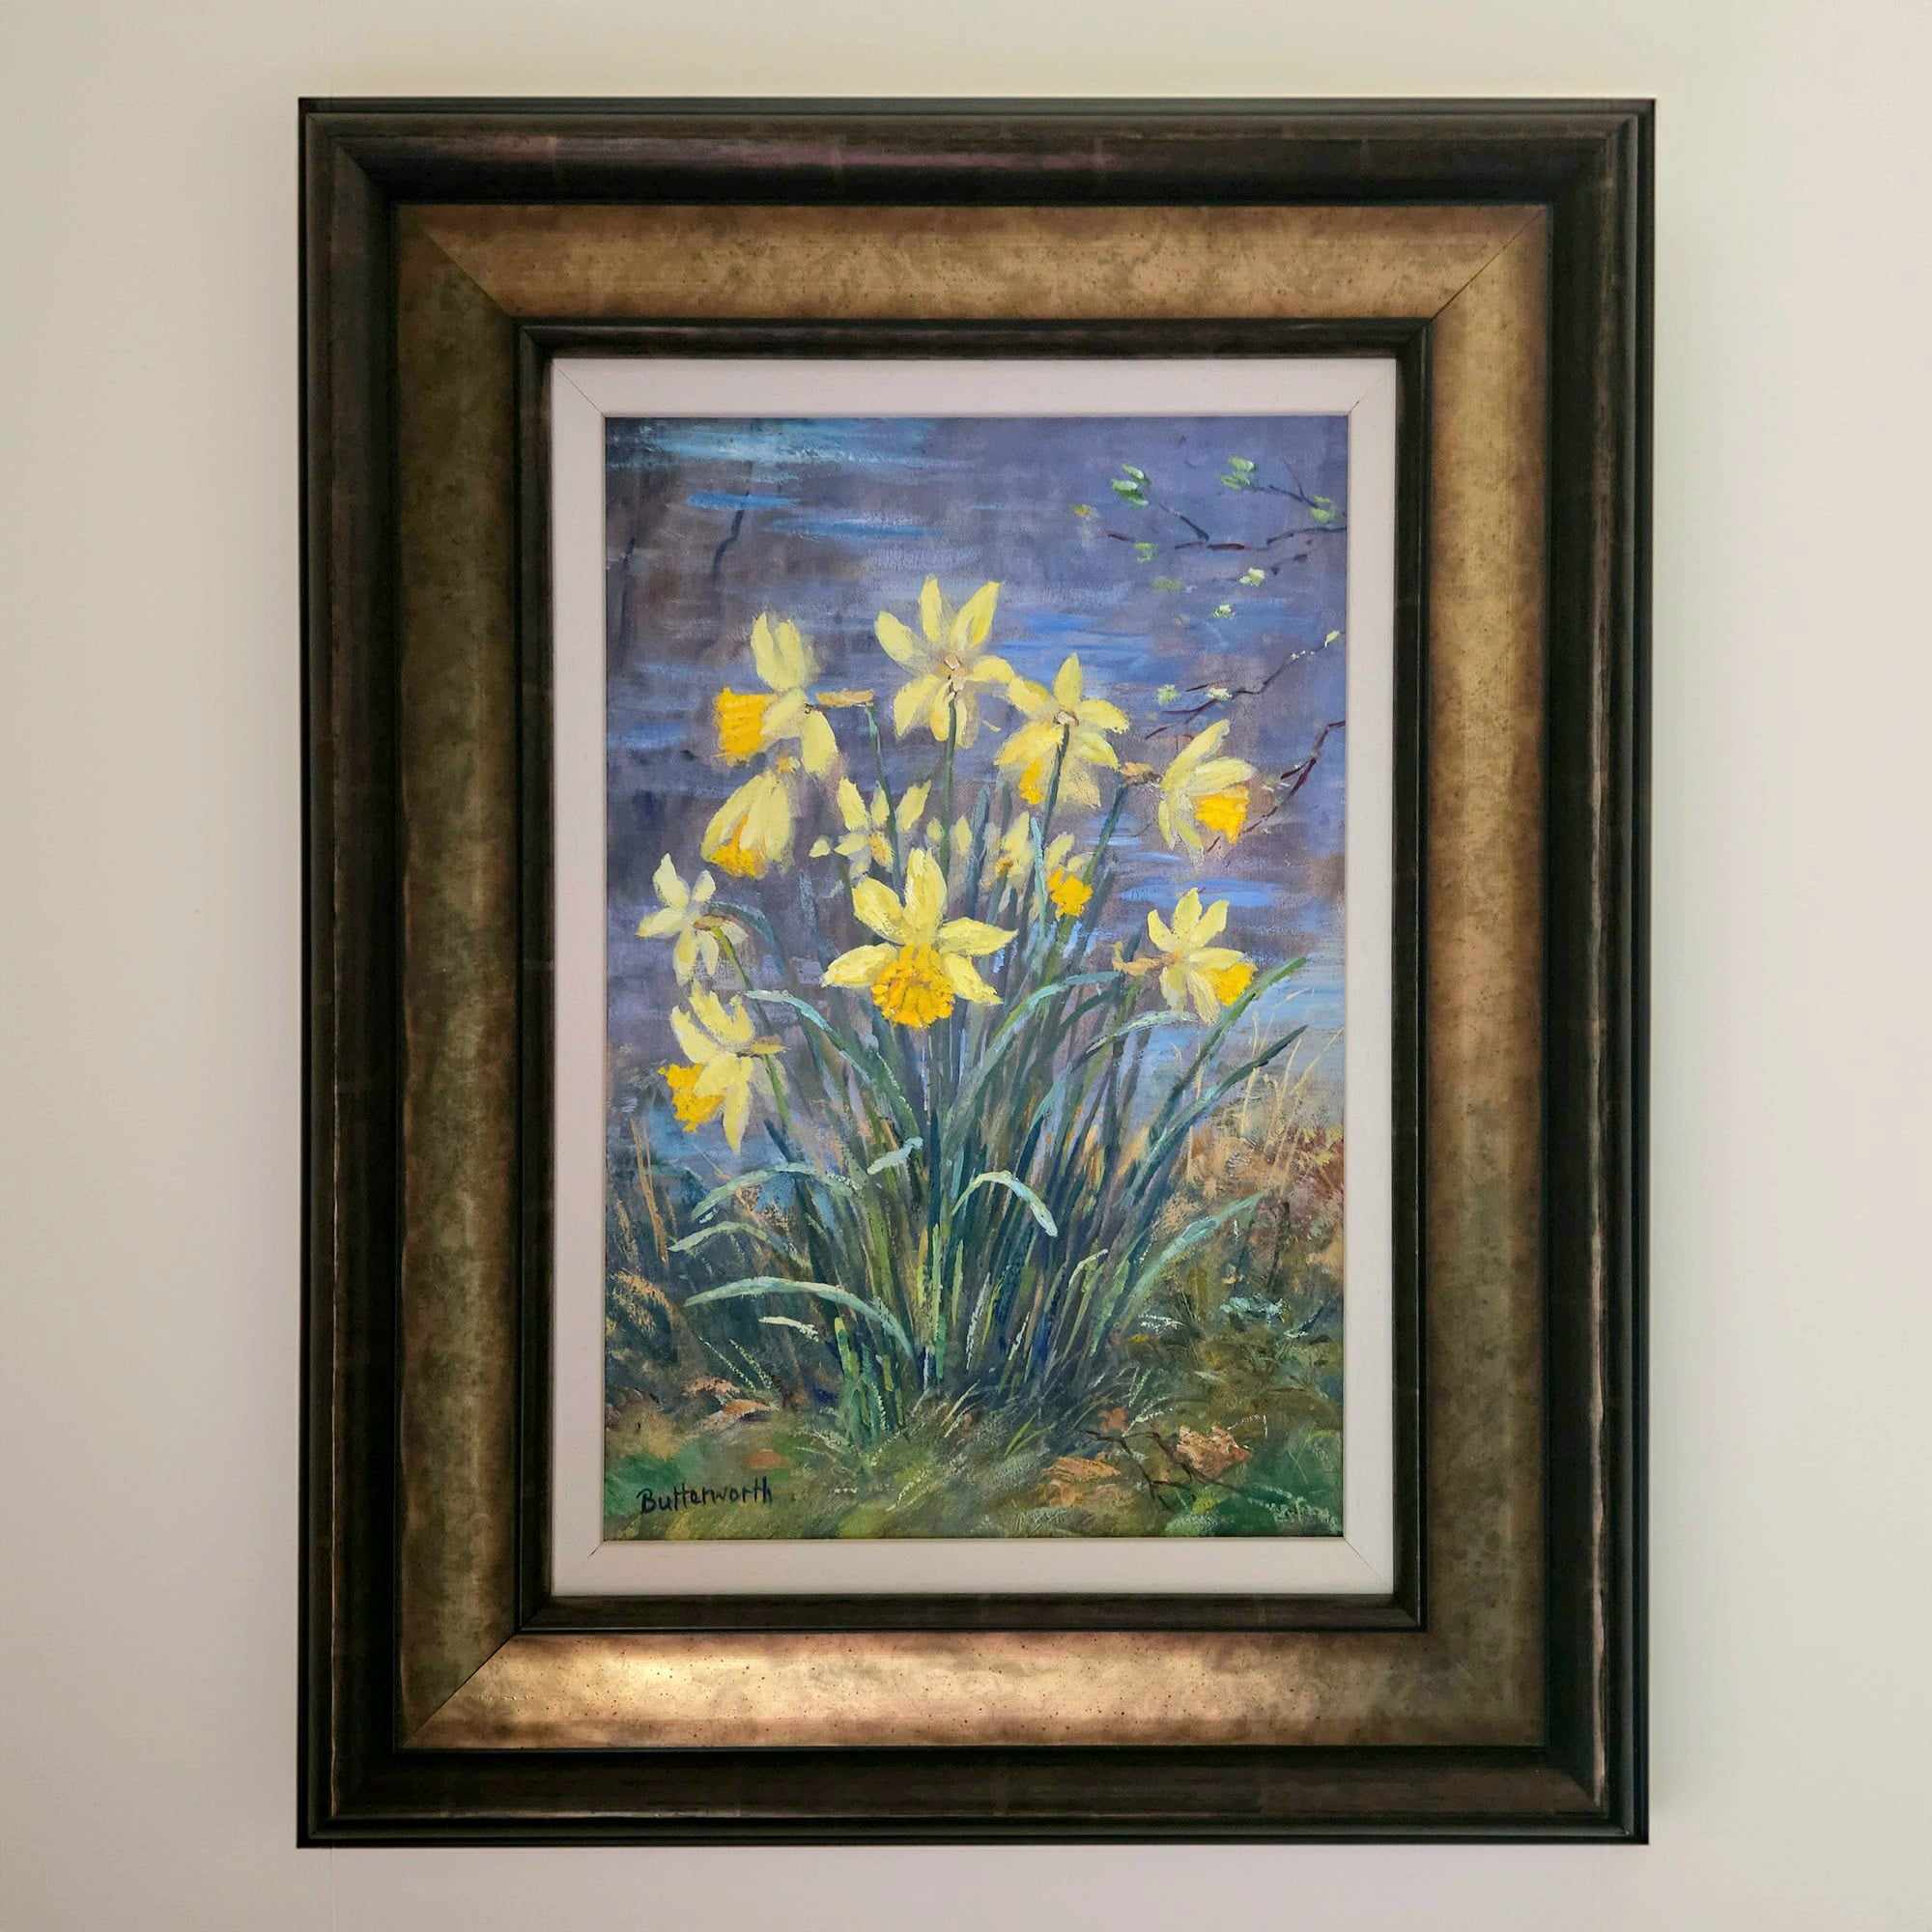 Framed oil painting of Scottish Daffodils by the pond by aberdeenshire artist Howard Butterworth